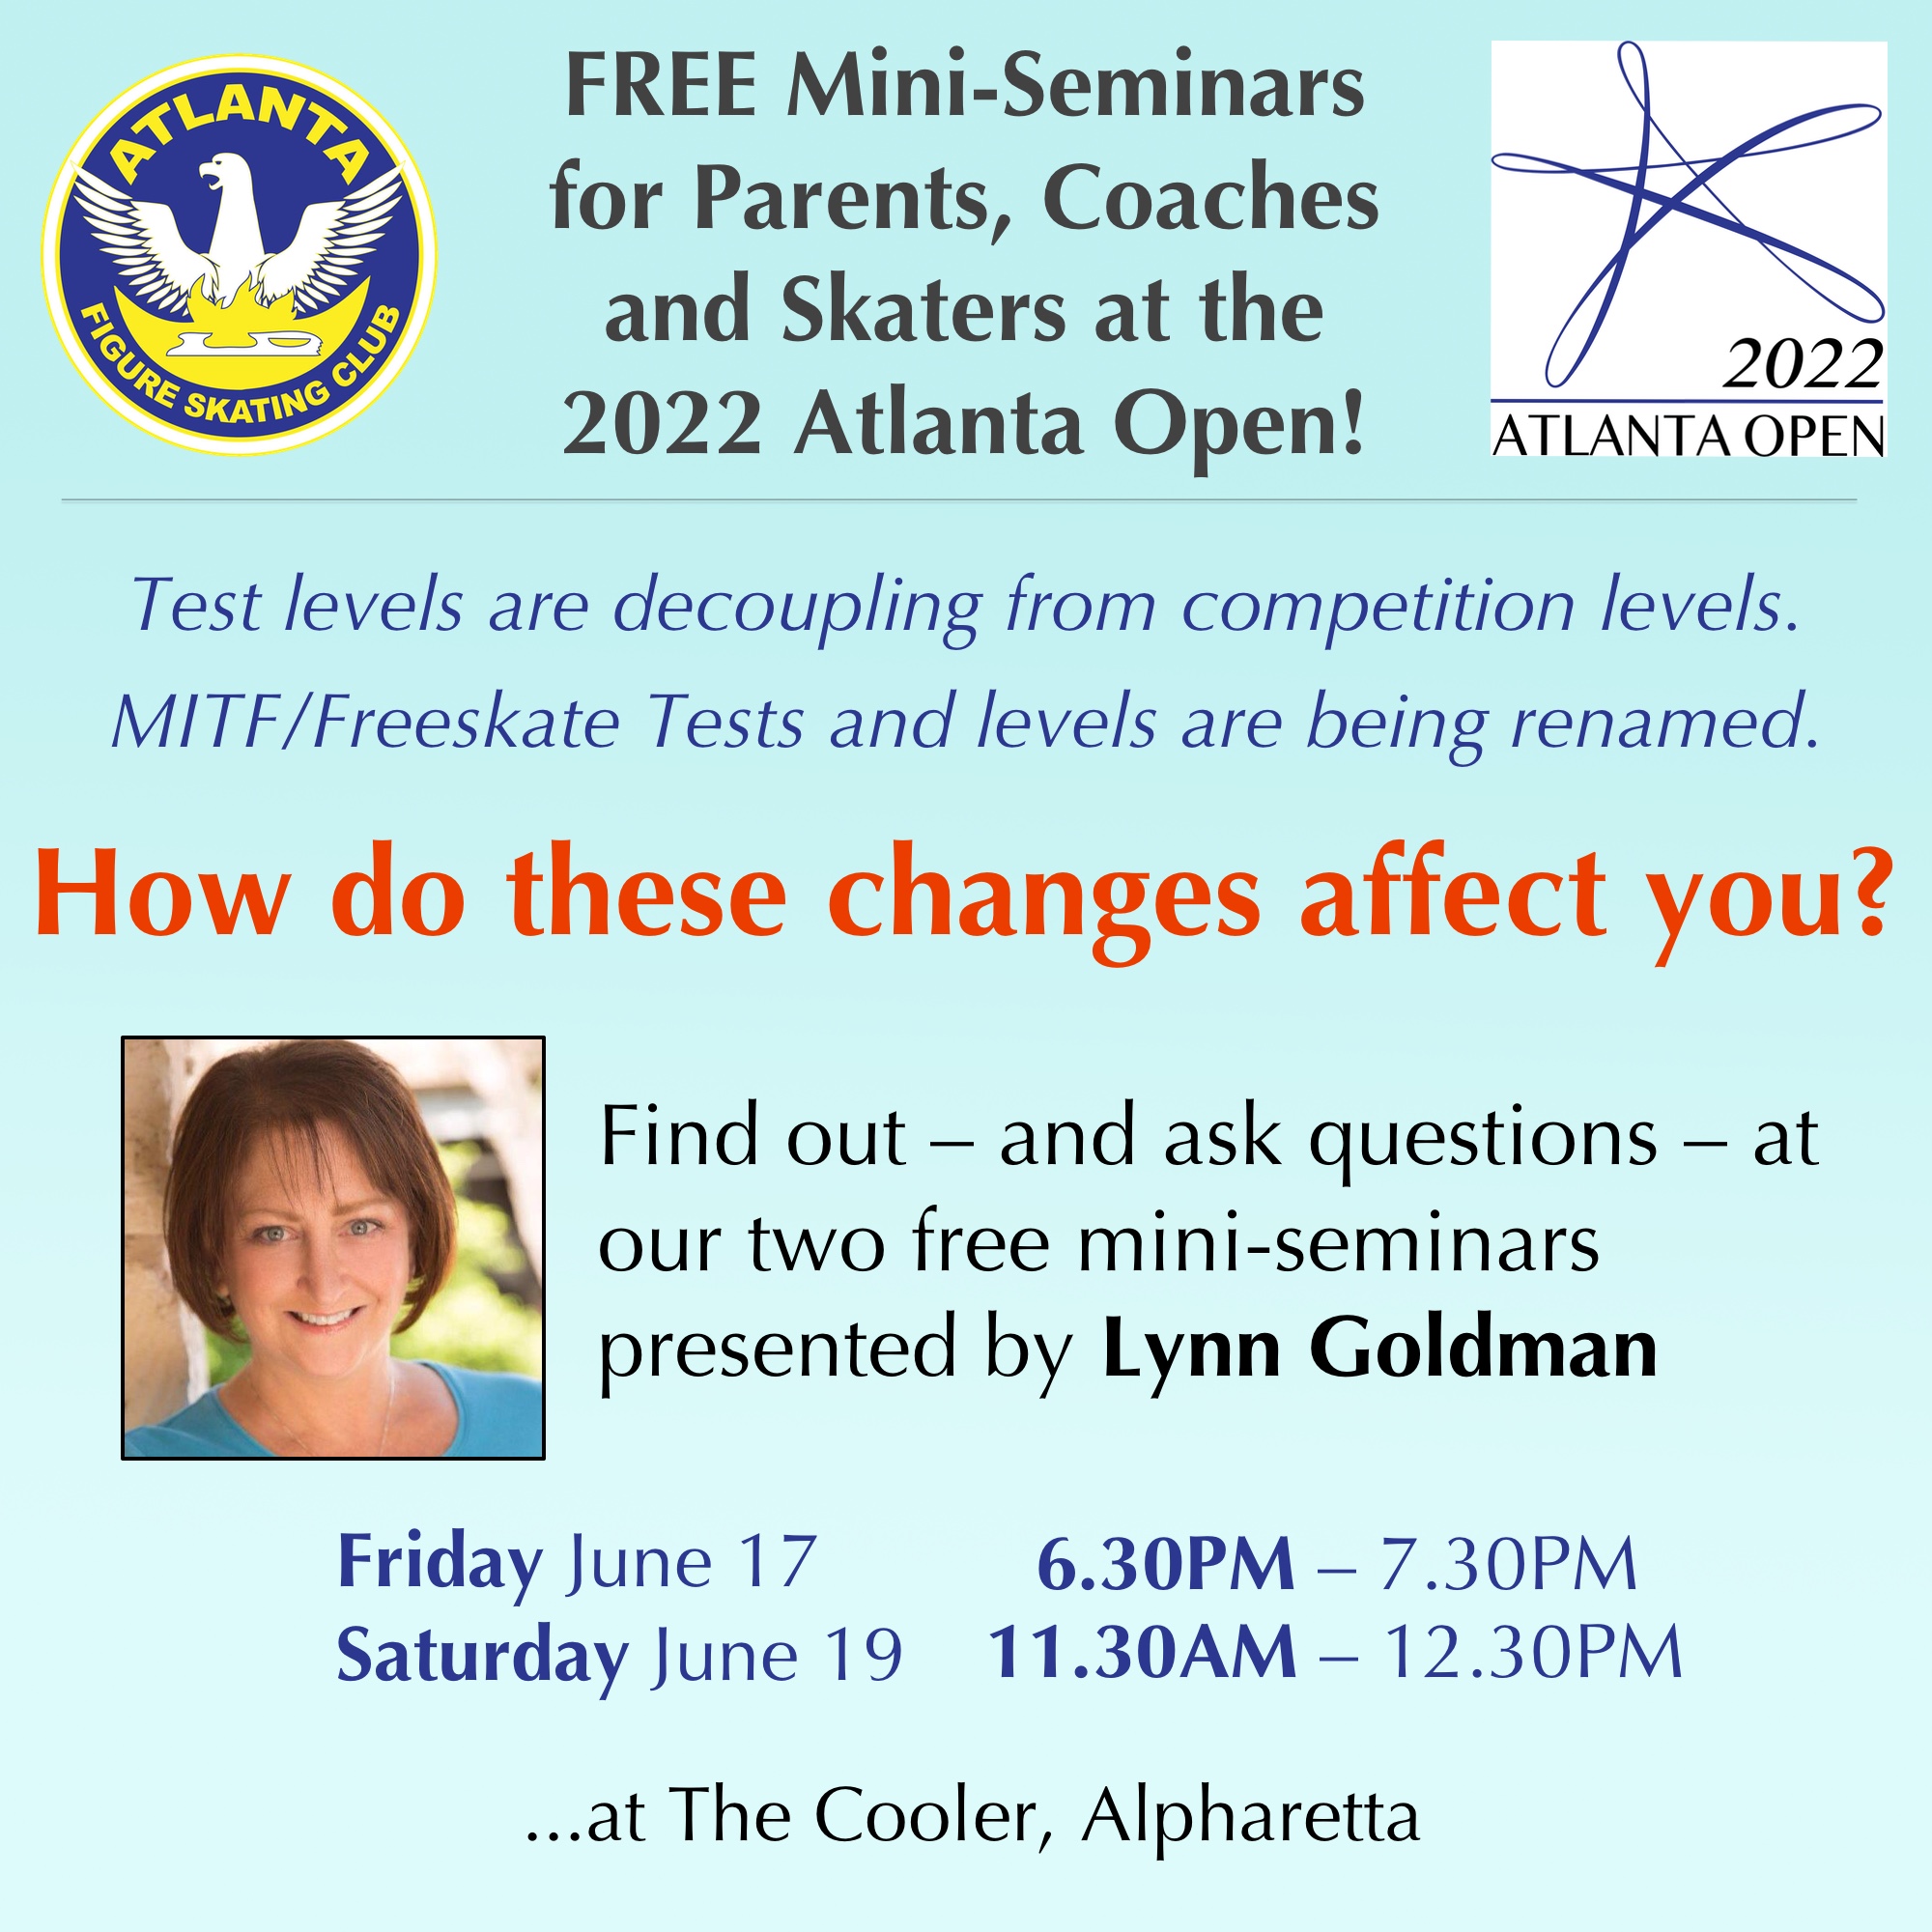 Flyer for Free mini seminars at the Atlanta Open describing how the upcoming changes decoupling test levels from competition levels and the renaming of MITF/Freeskate tests and levels impact skaters, coaches and parents. There are two sessions: Friday 6.30PM and Saturday 11.30AM at The Cooler.